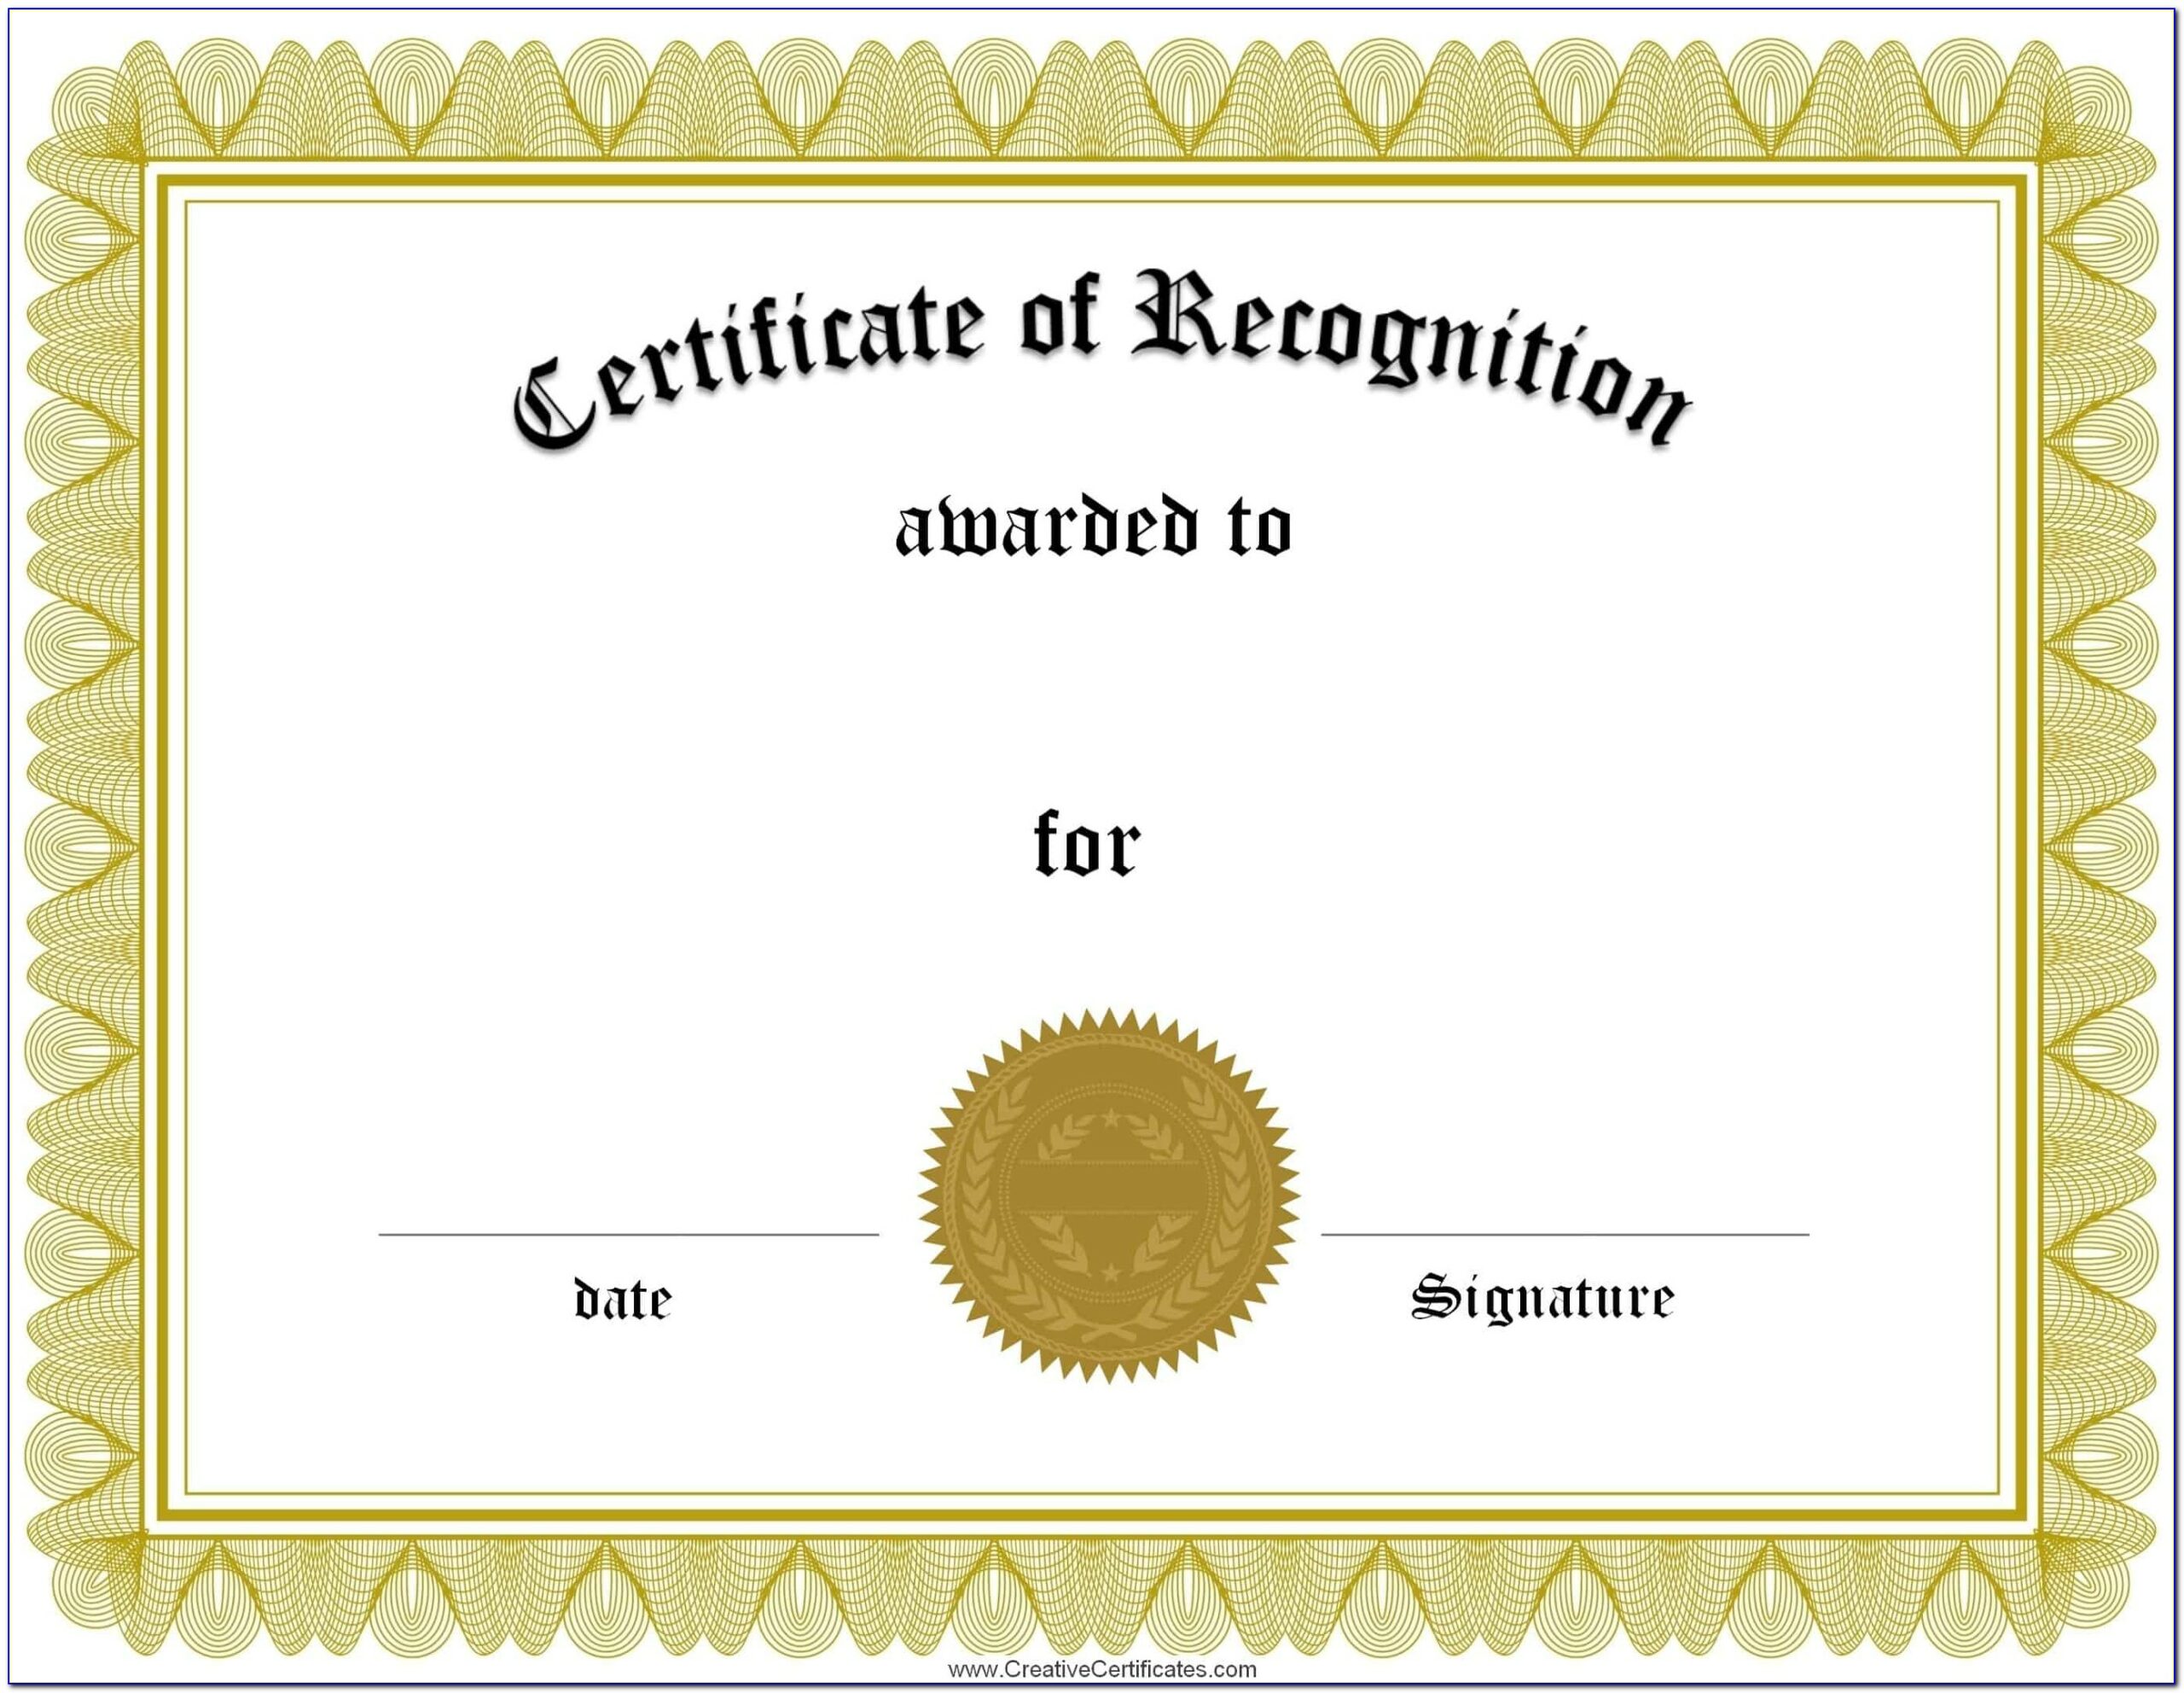 Certificates Of Recognition Templates Free